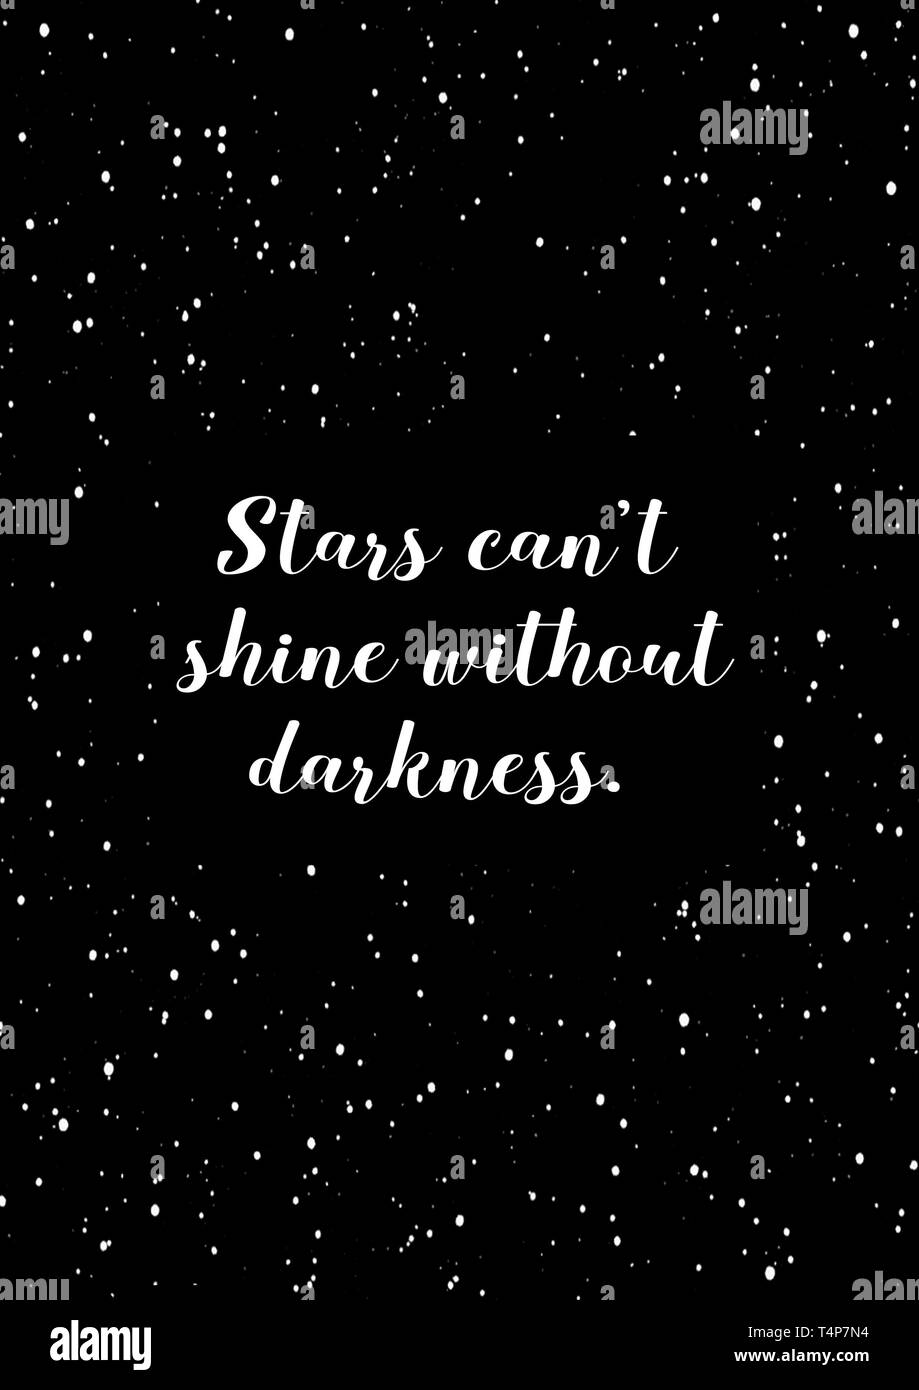 Stars can't shine without darkness. Quote with night sky with stars background Stock Photo